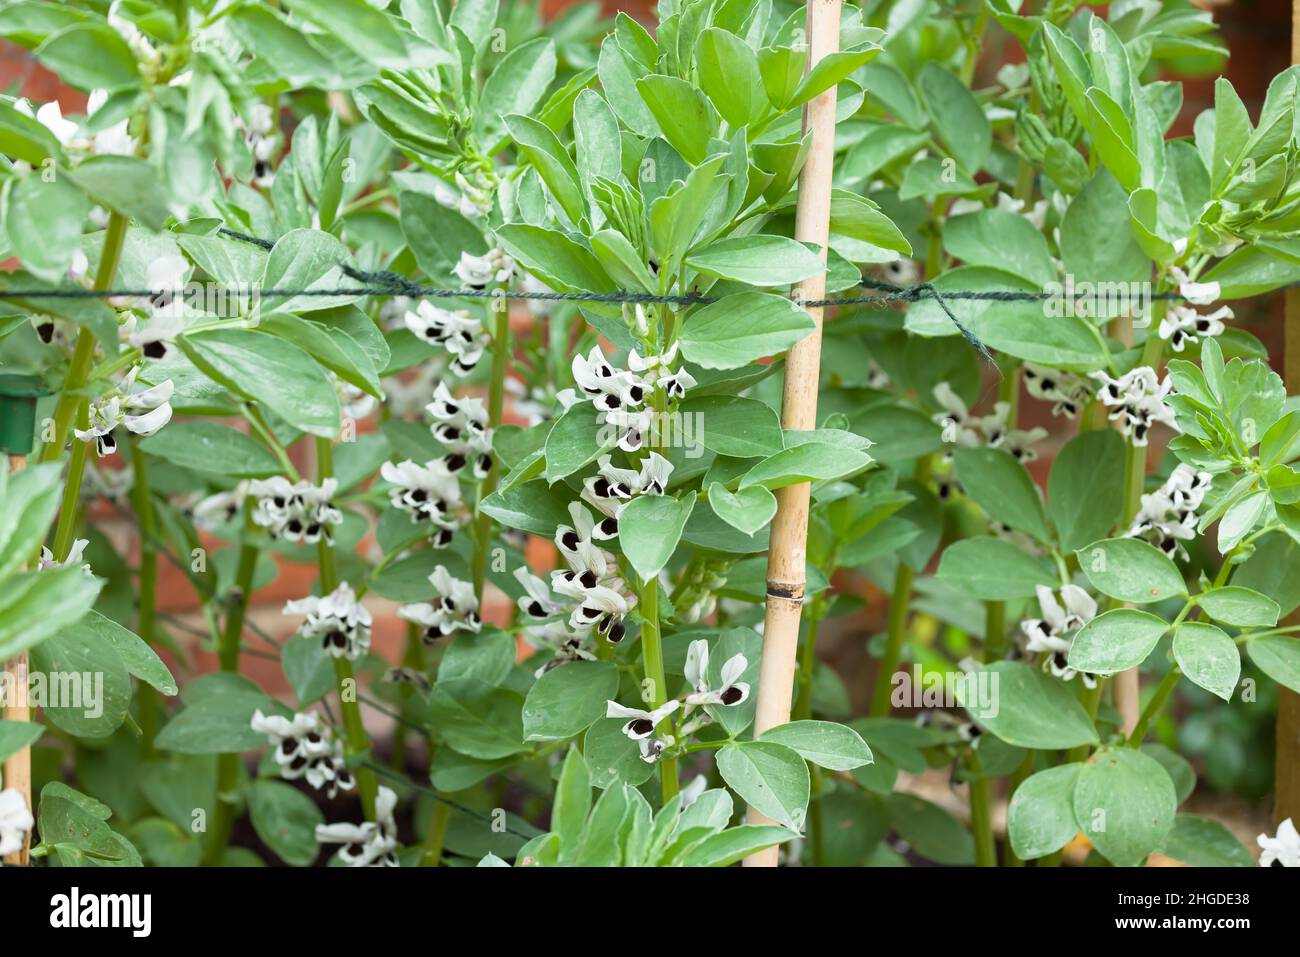 Fava bean (broad bean) plants, detail of growing plants in flower with bamboo canes for support Stock Photo